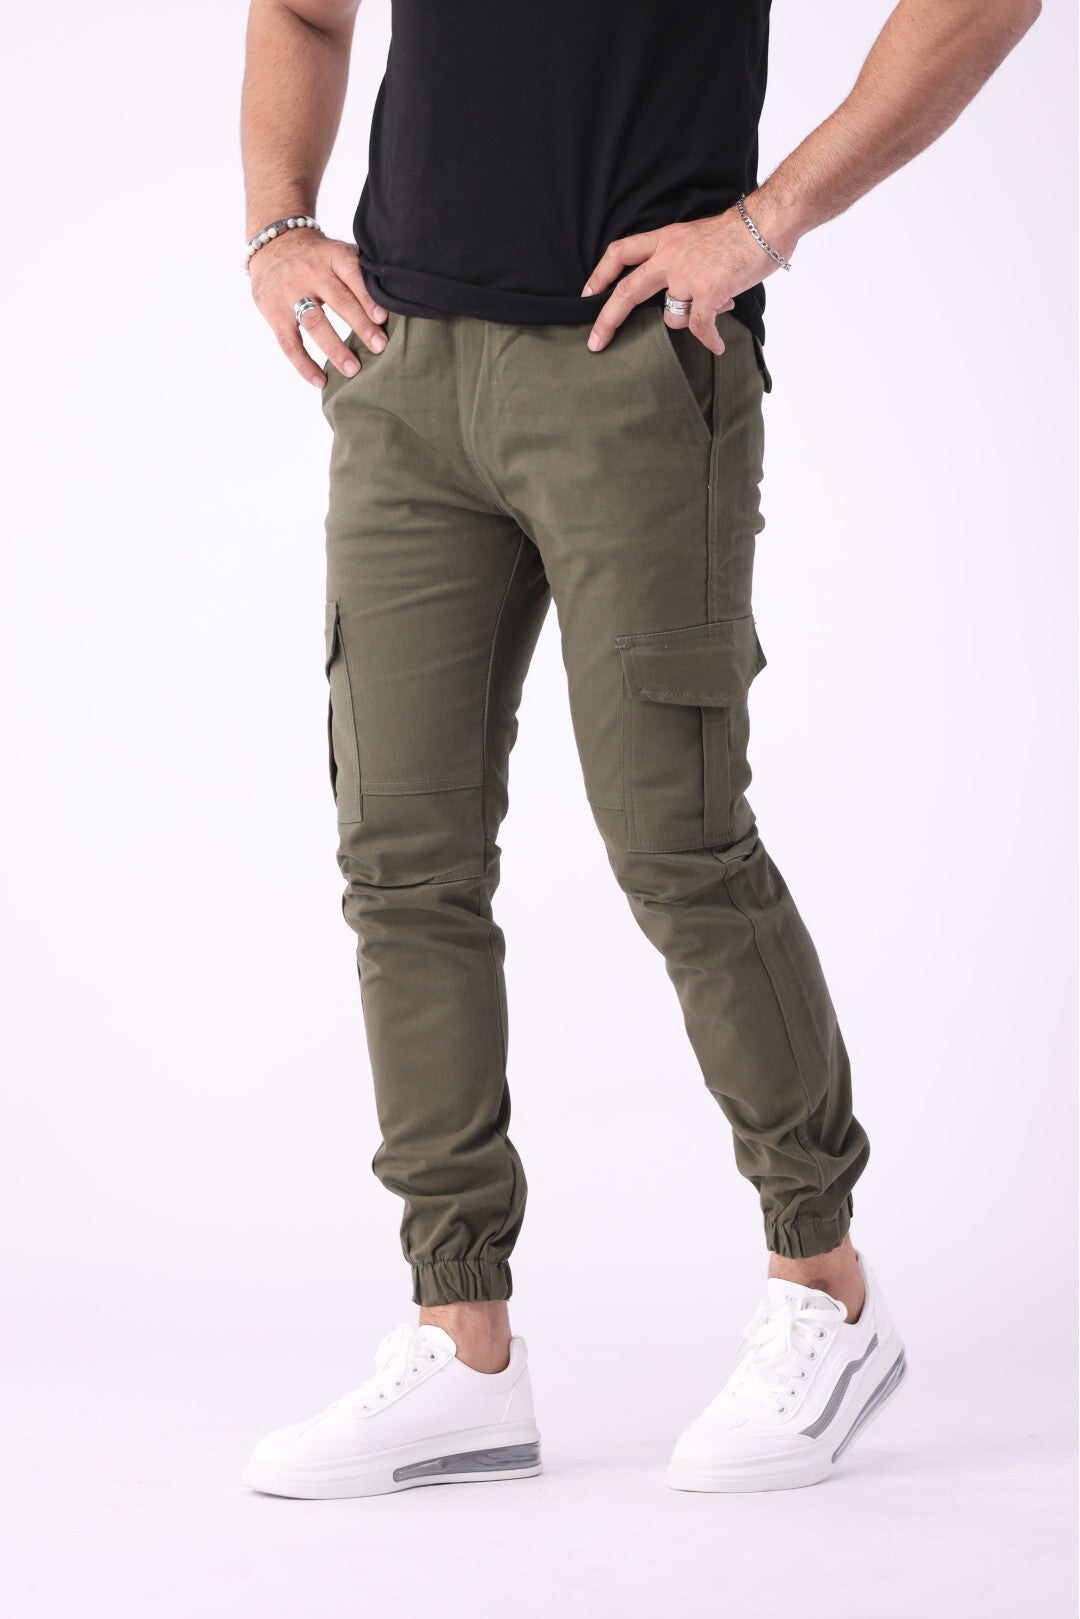 Army Green Six Pocket Cargo Trousers for Men, 6 Pocket Cargo Pant